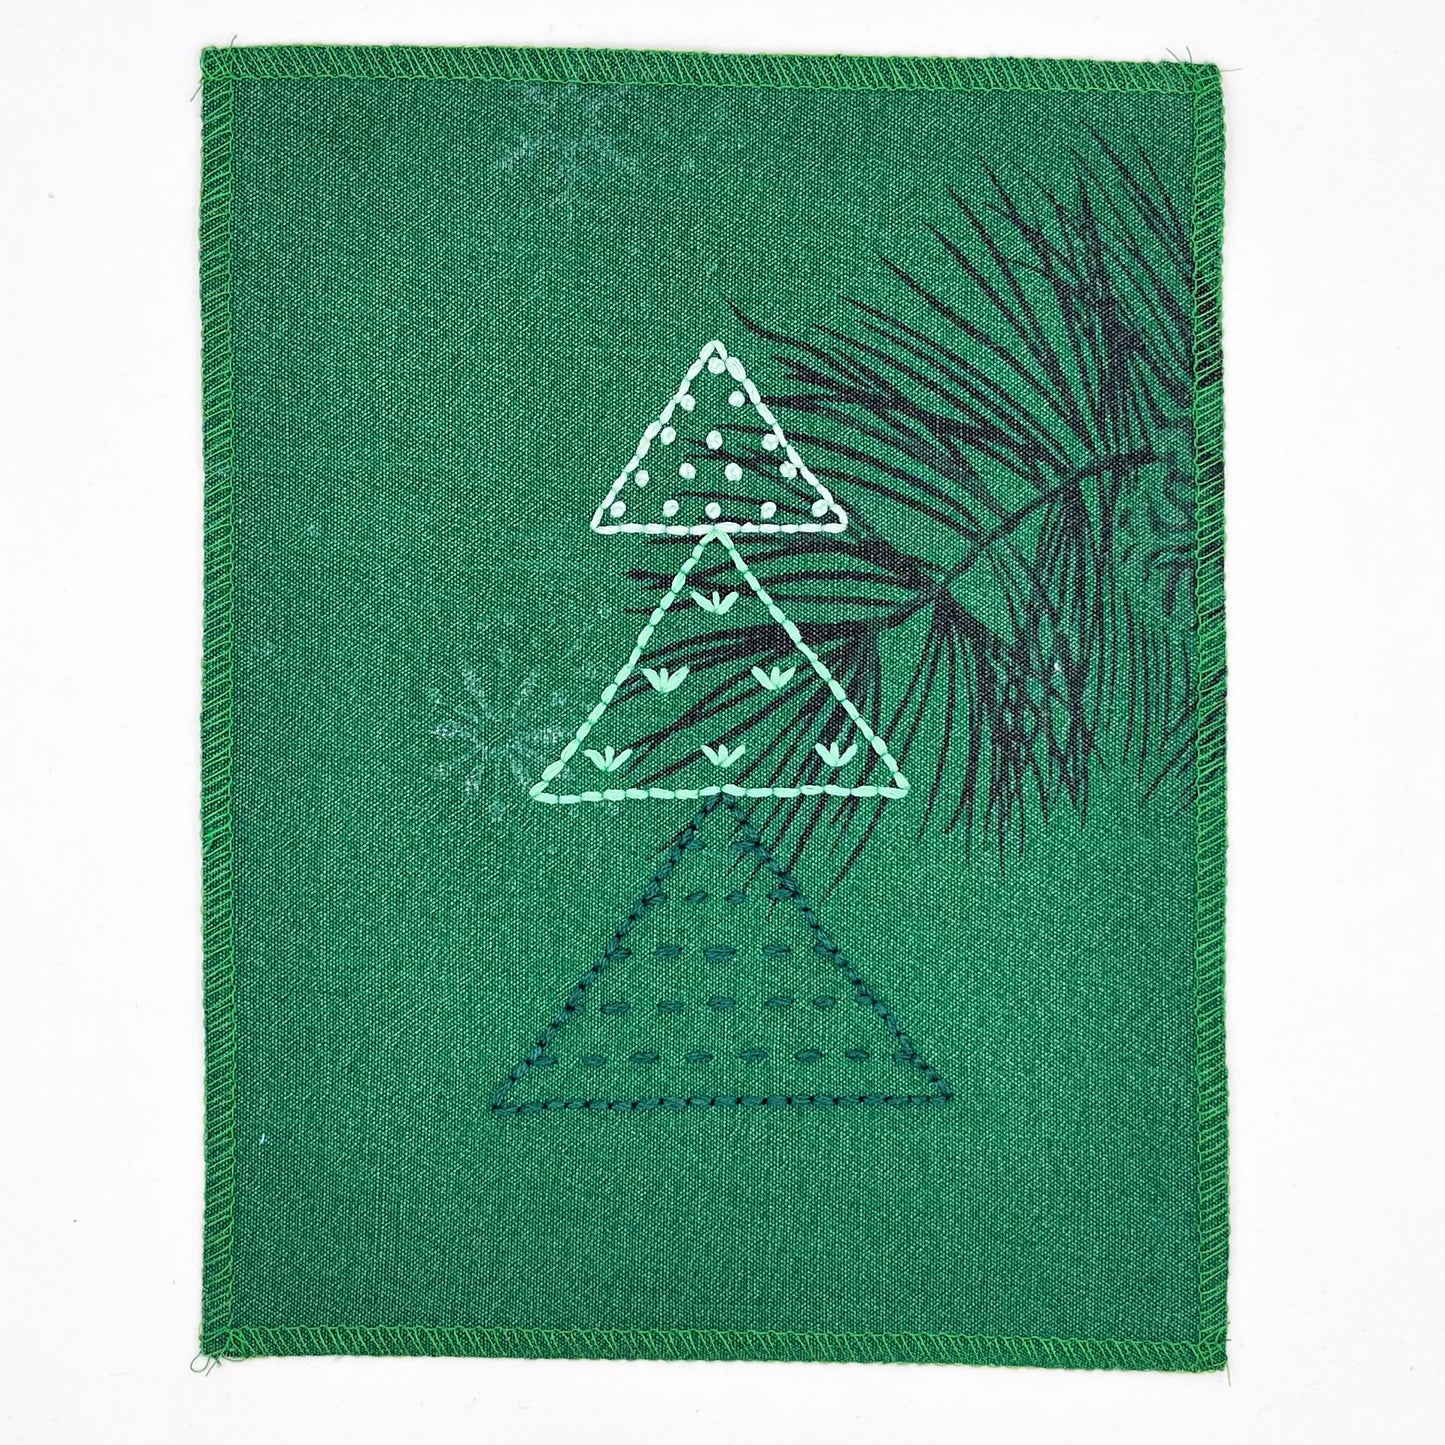 a fabric wall hanging made from bright green fabric with pine branches printed on it, and stitched over with Christmas trees made from three triangles, each triangle filled with different types of stitches in shades of green